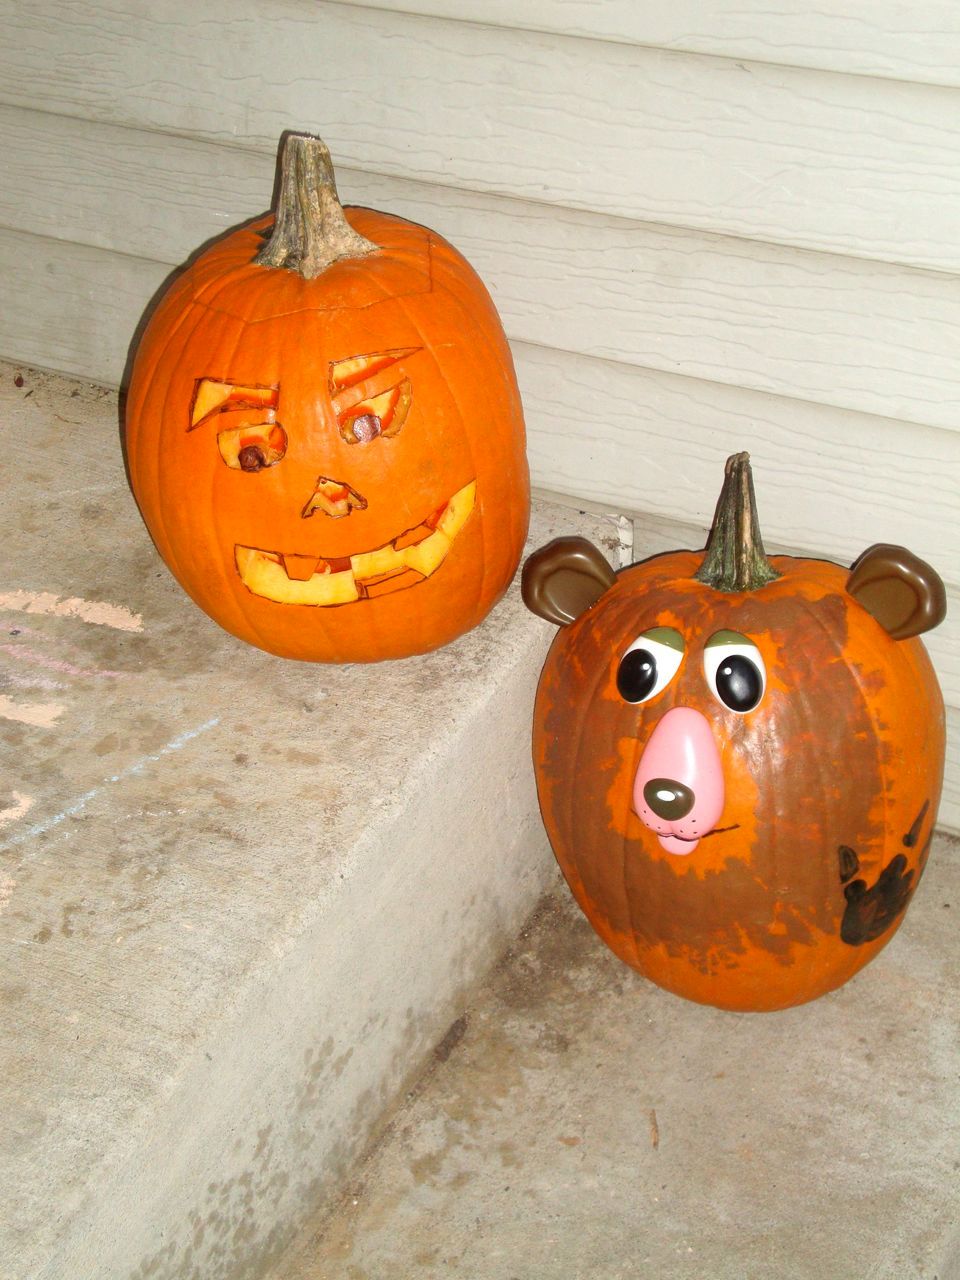  A bear for Mommy and Daddy's Jack-o-lantern 